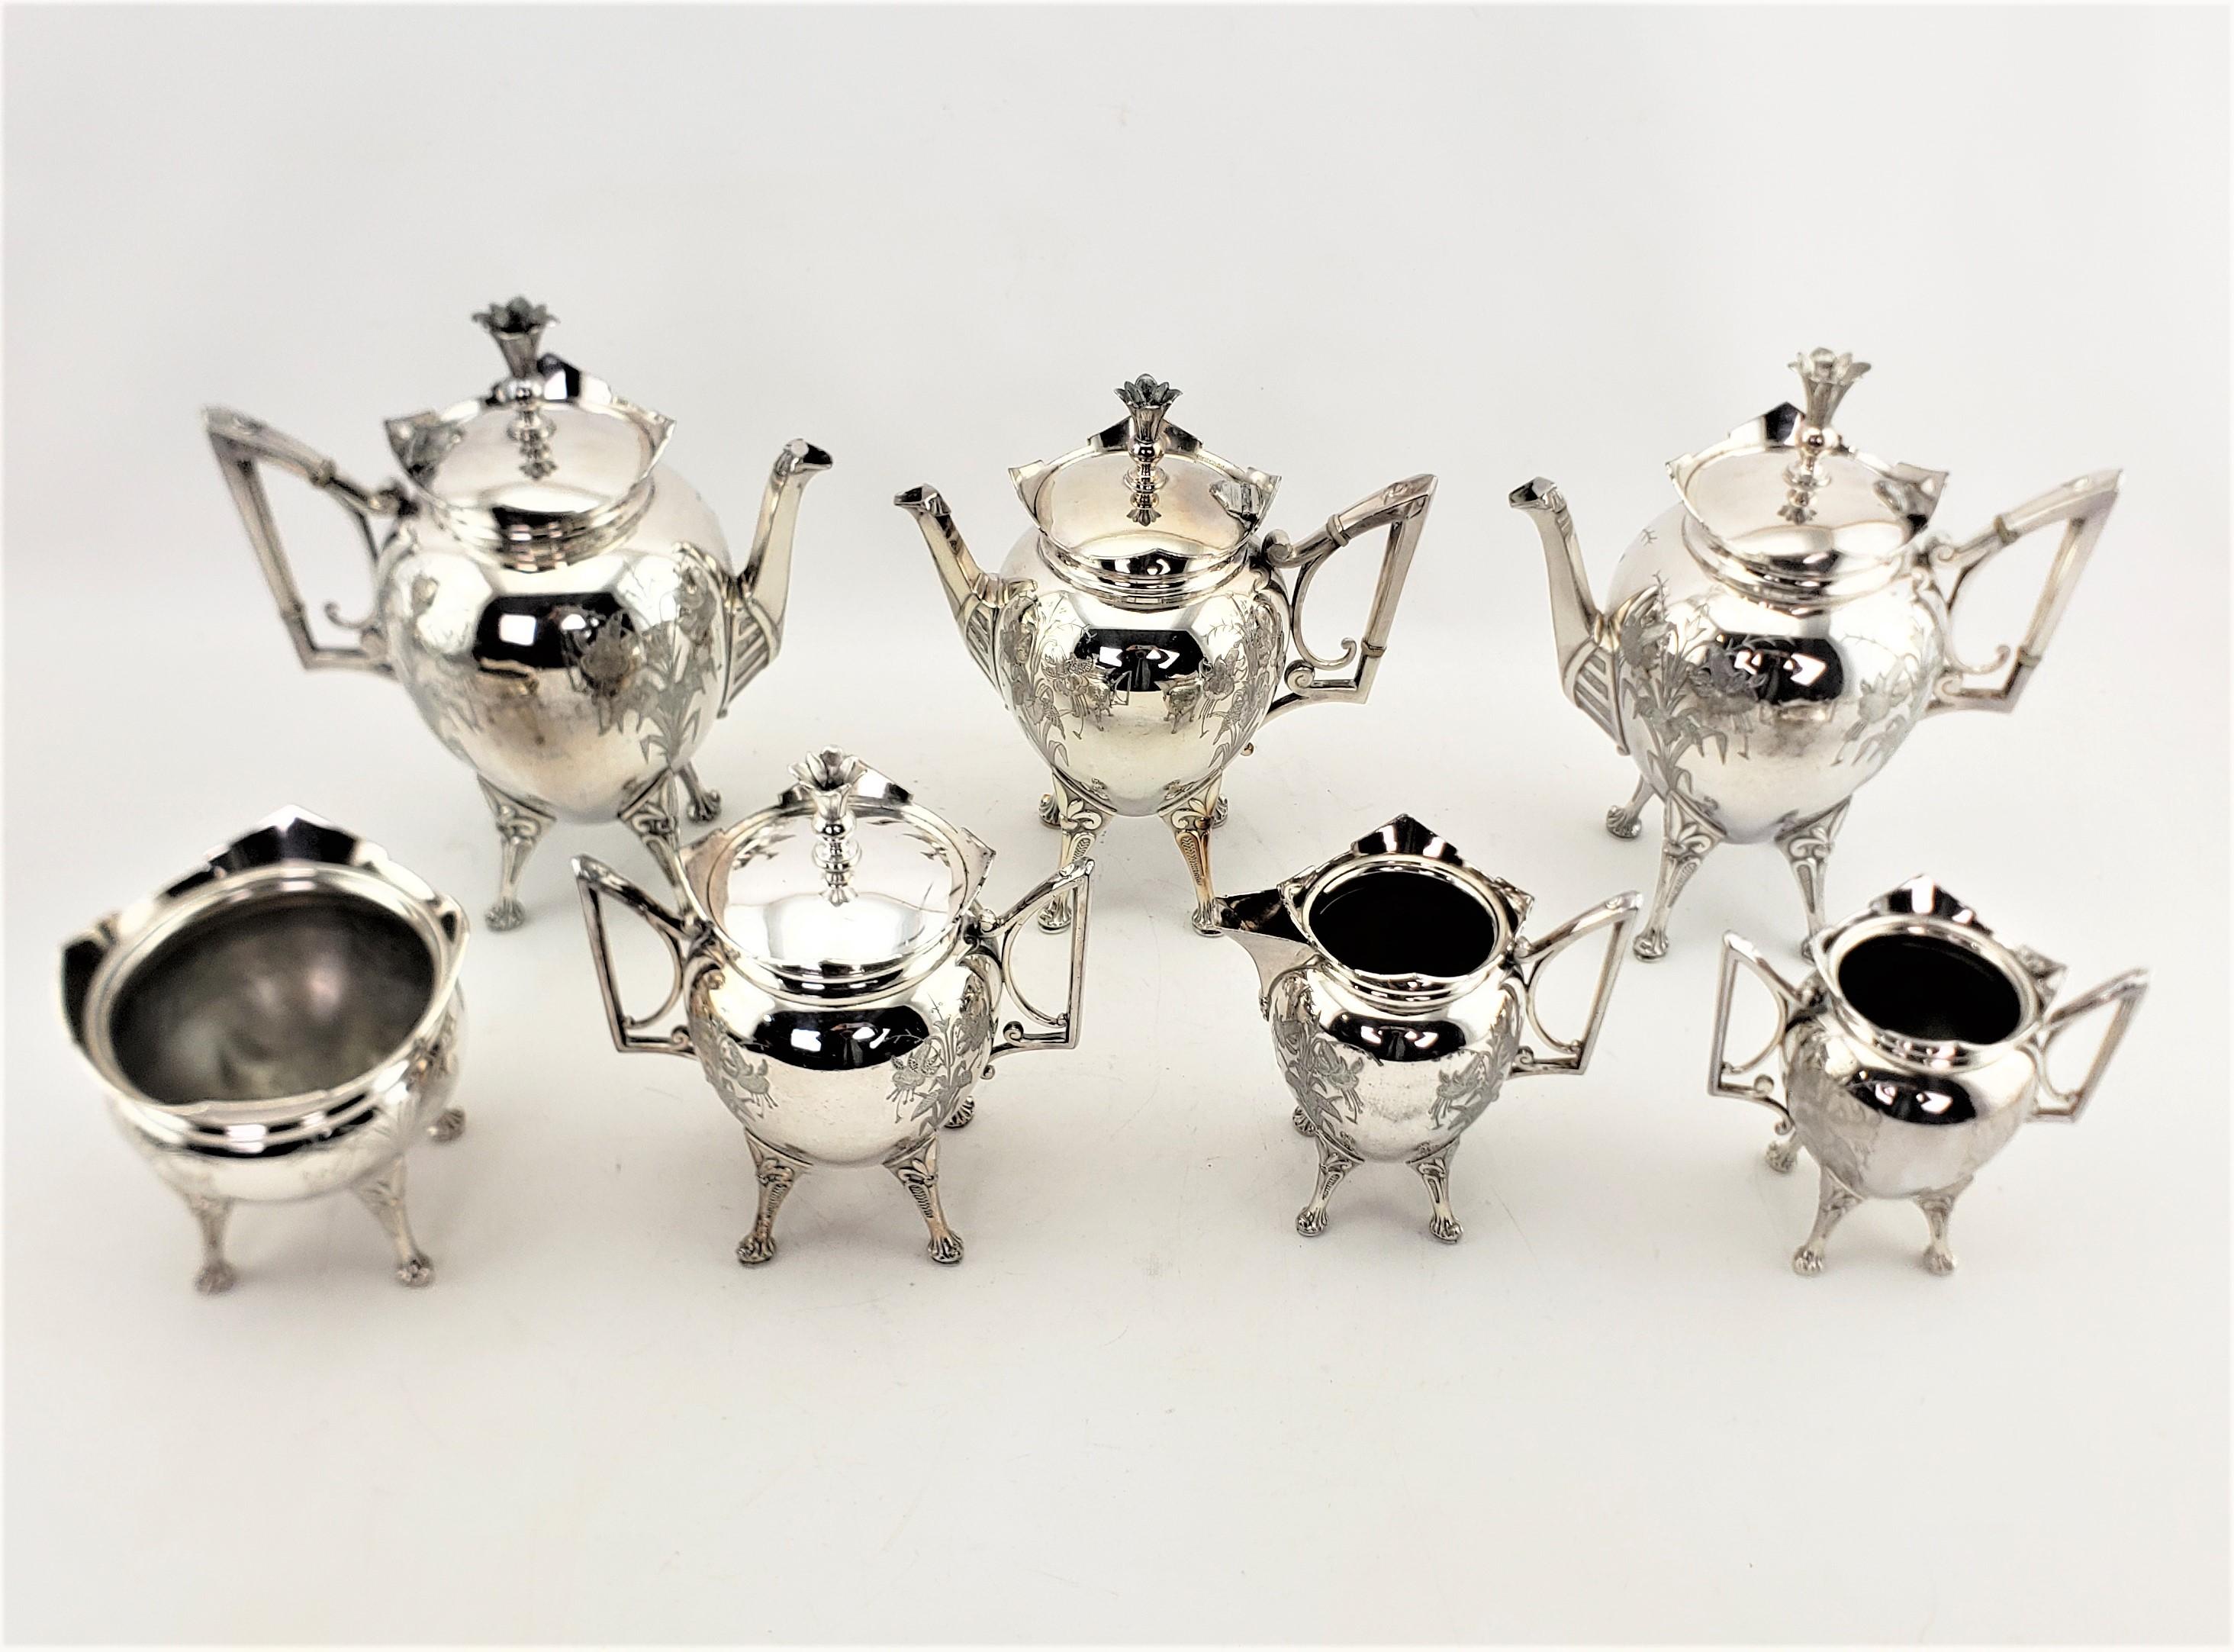 American Antique Aesthetic Movement 7 Piece Silver Plated Tea Set with Floral Decoration For Sale